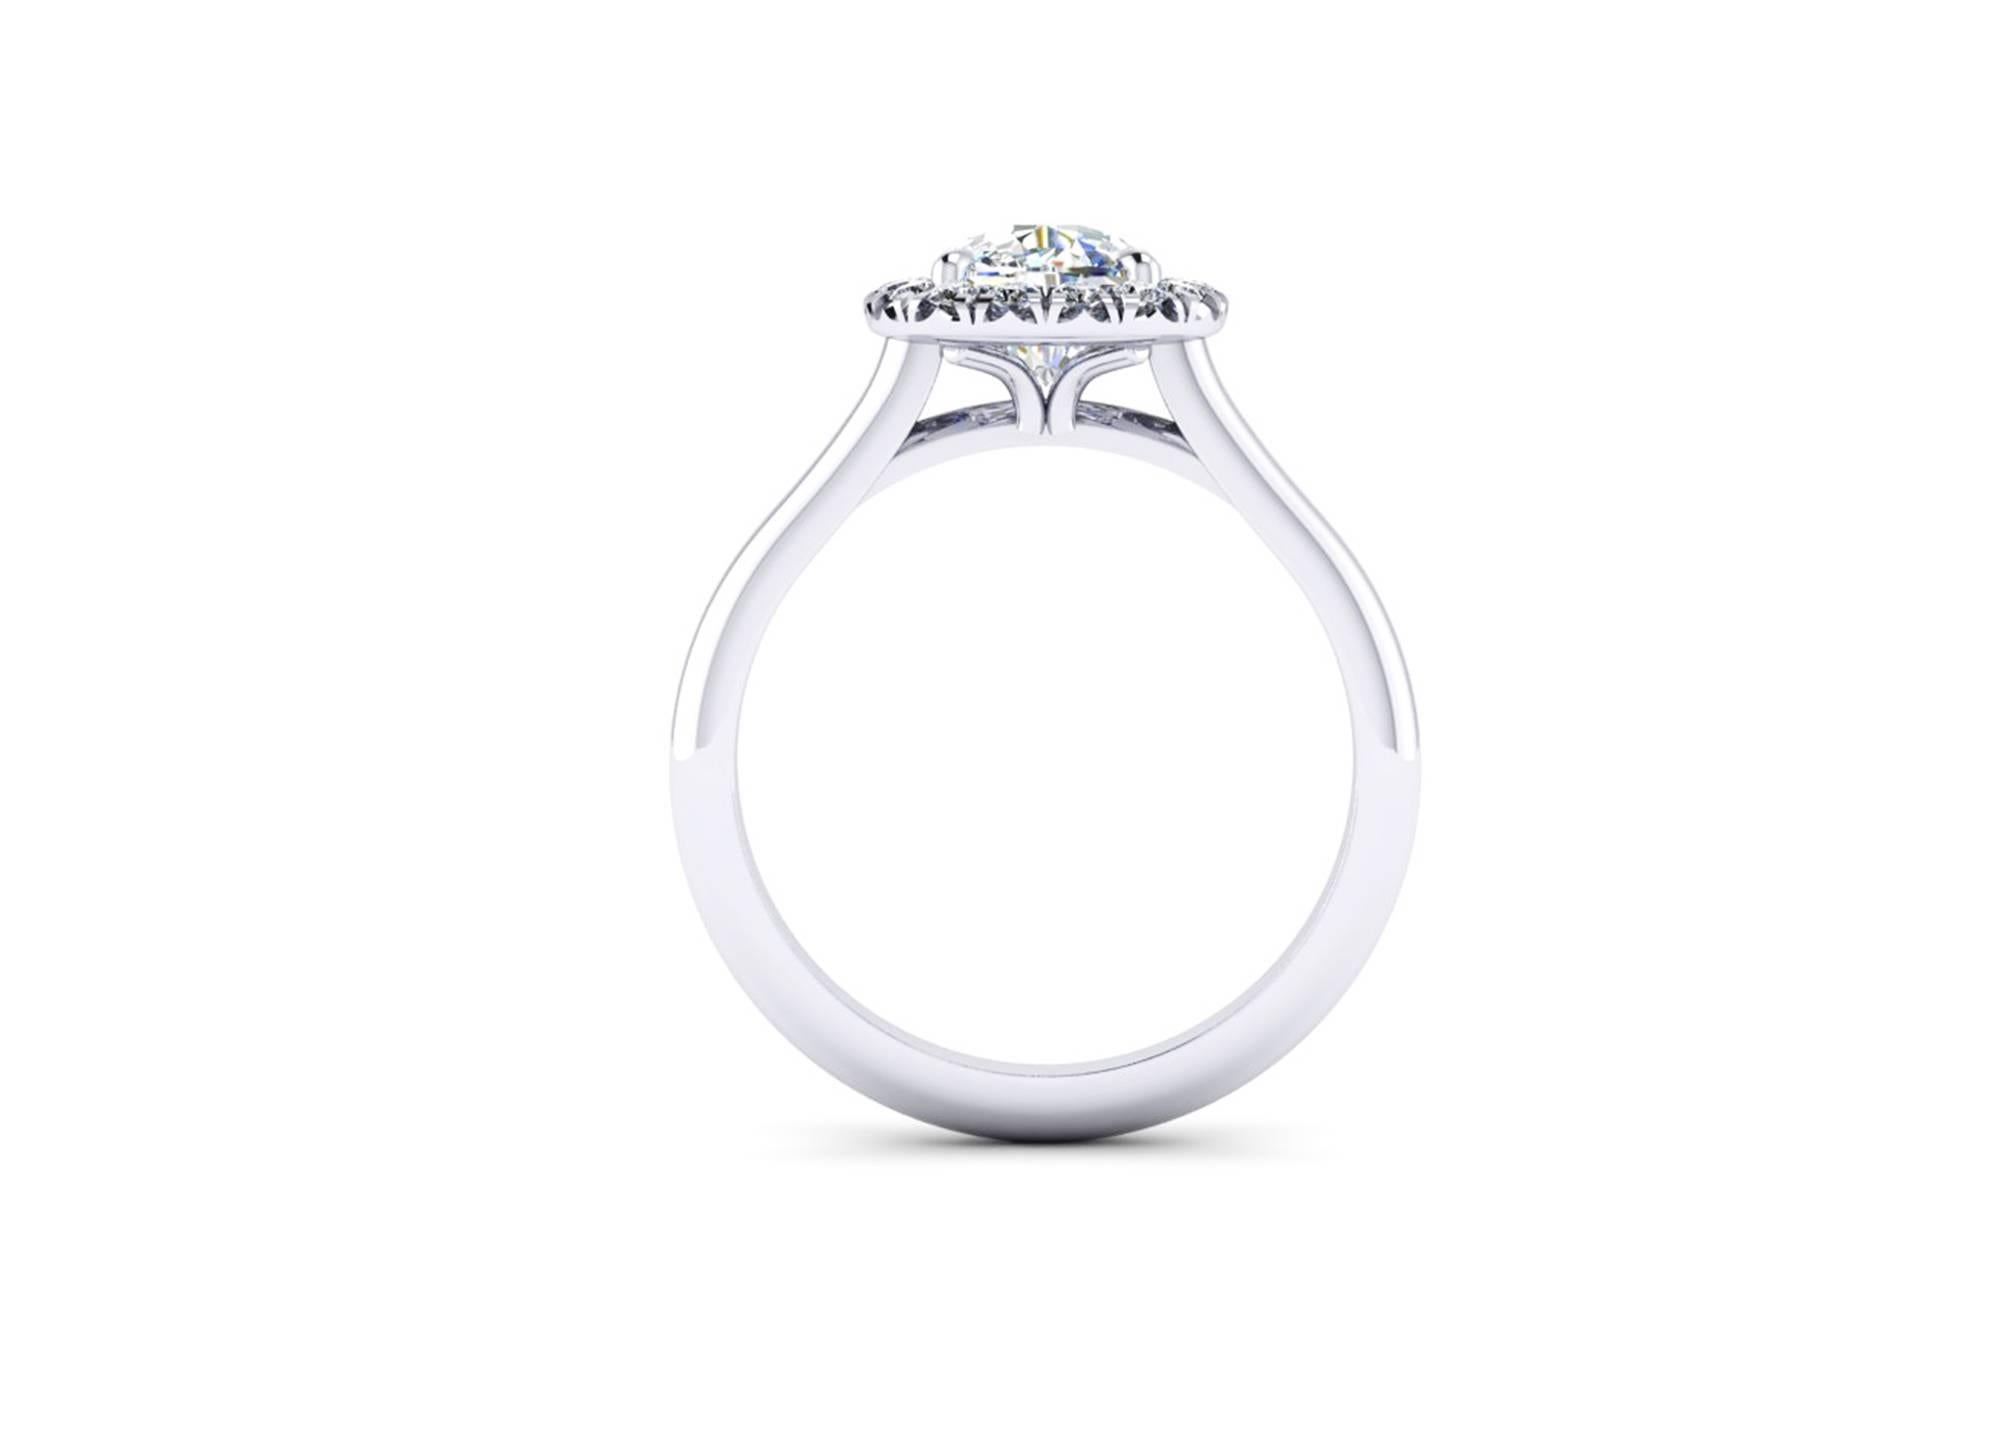 Ferrucci GIA Certified 1.51 carat G color, VS2 clarity Diamond in handmade Halo Platinum ring.
Entirely designed and handmade in New York City, showcasing an exquisite quality diamond, cushion cut with diamond halo and smooth comfortable, easy to